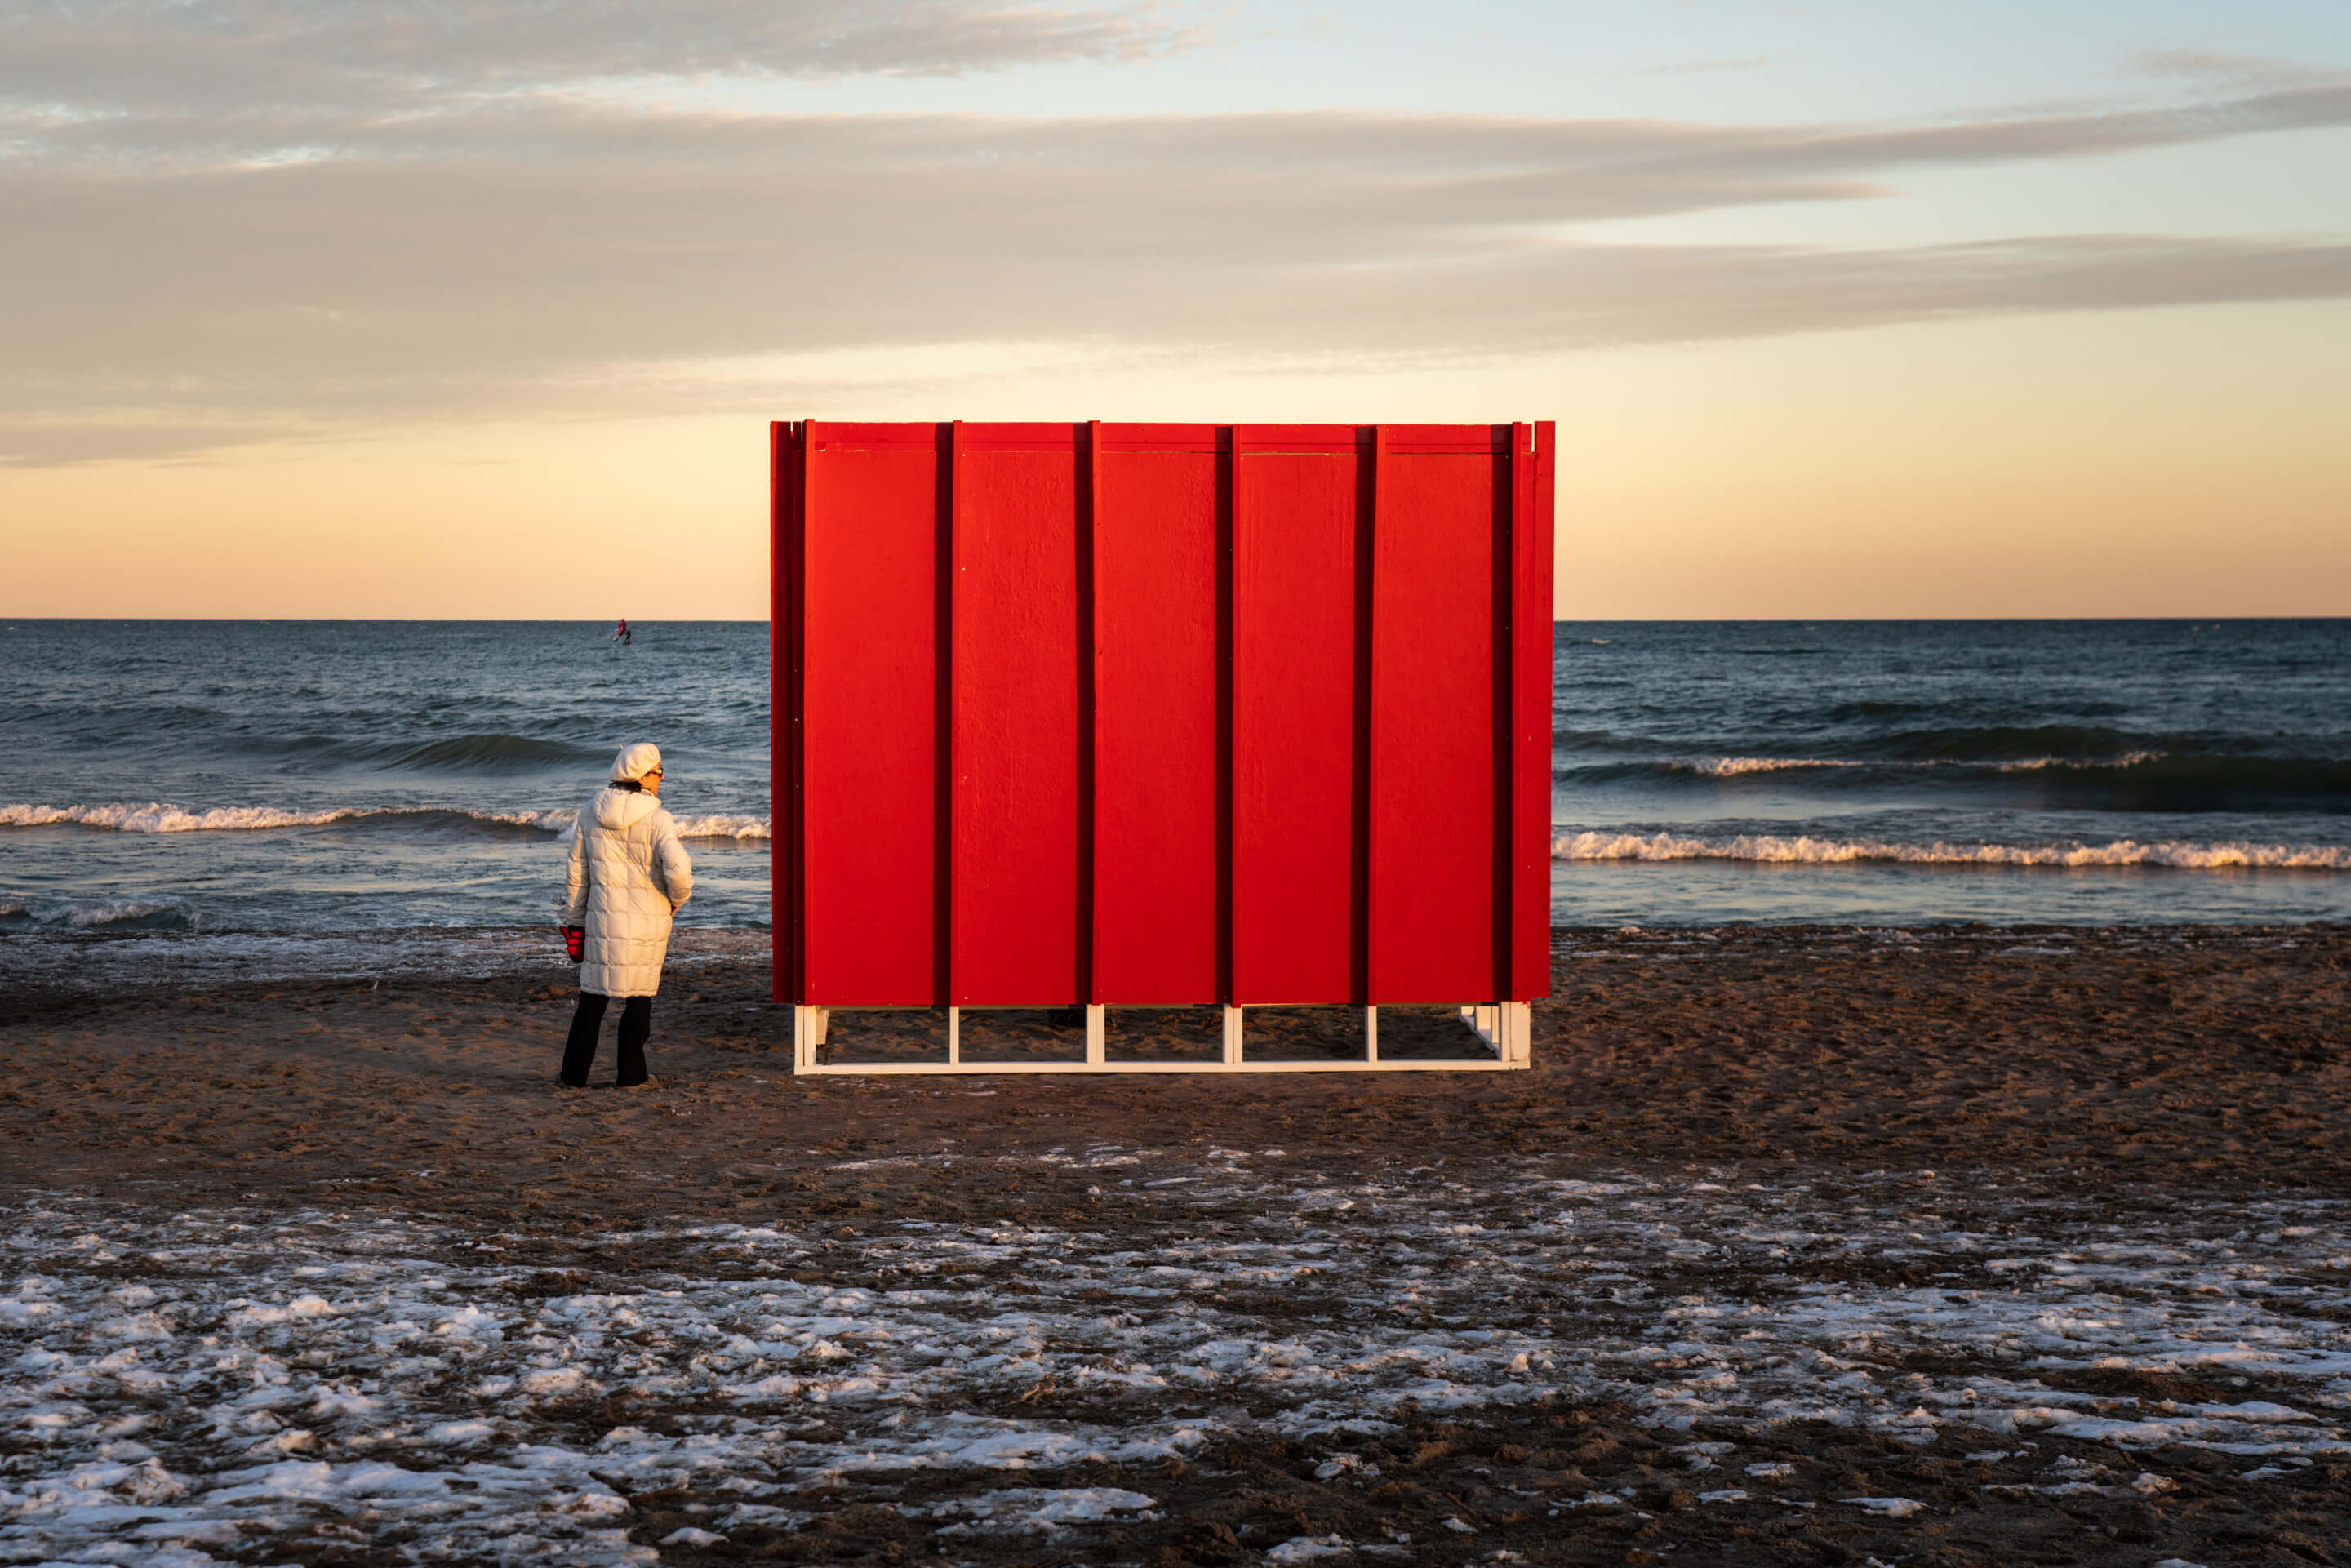 a person approaches a red cube structure on a beach